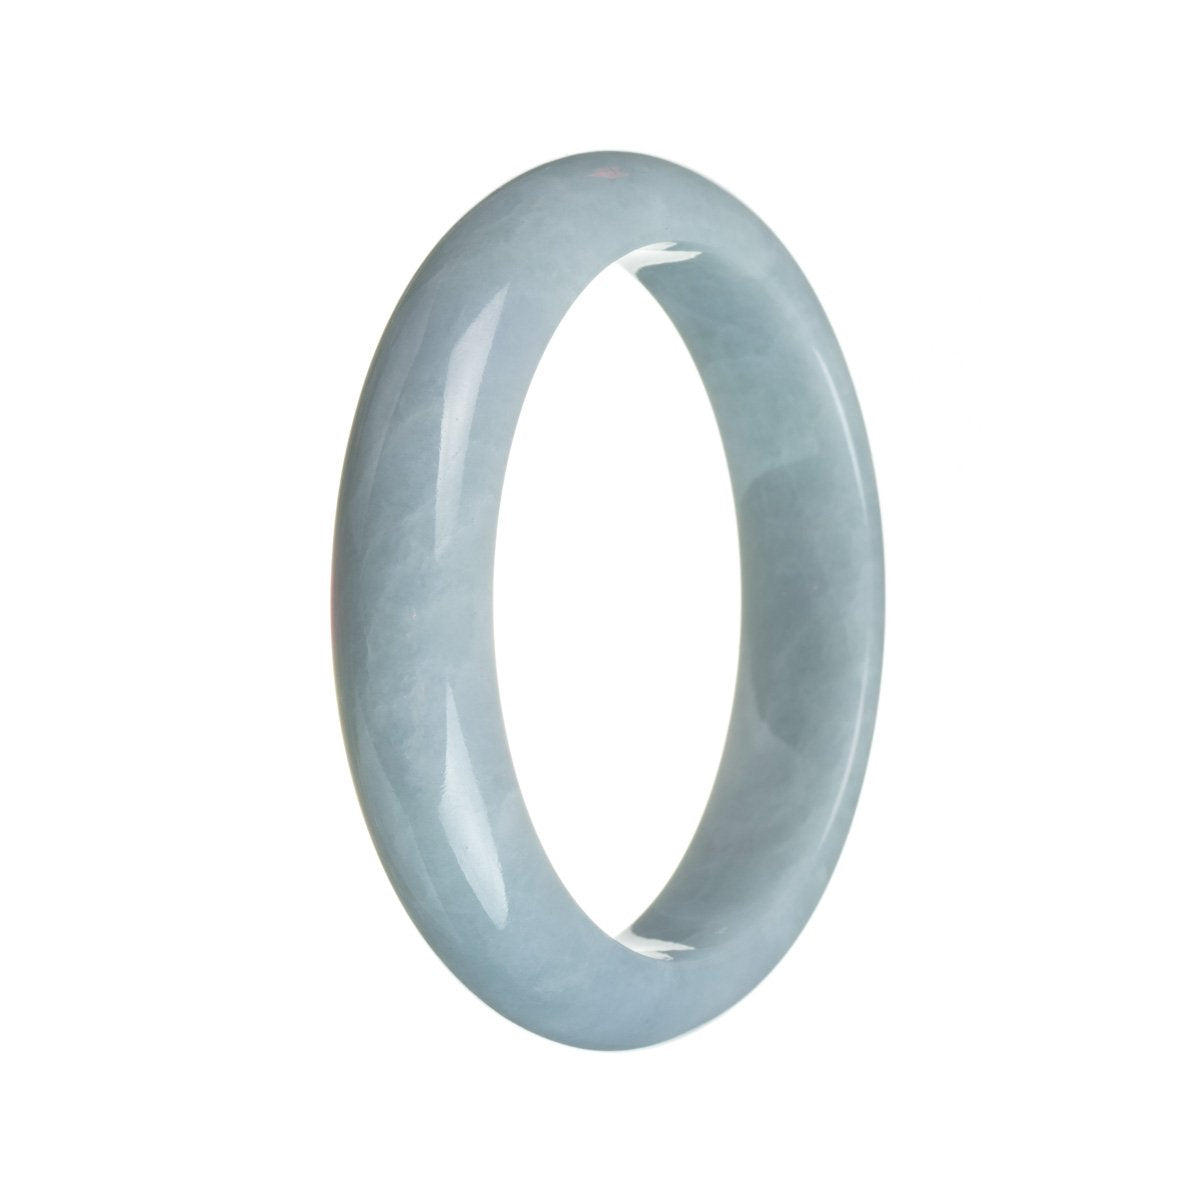 A close-up photo of a bluish lavender Burmese Jade bangle. The bangle is round in shape and has a semi-smooth texture. It measures 59mm in diameter. The color of the jade is a beautiful blend of blue and lavender hues. The bangle appears to be of high quality and is part of the MAYS™ collection.